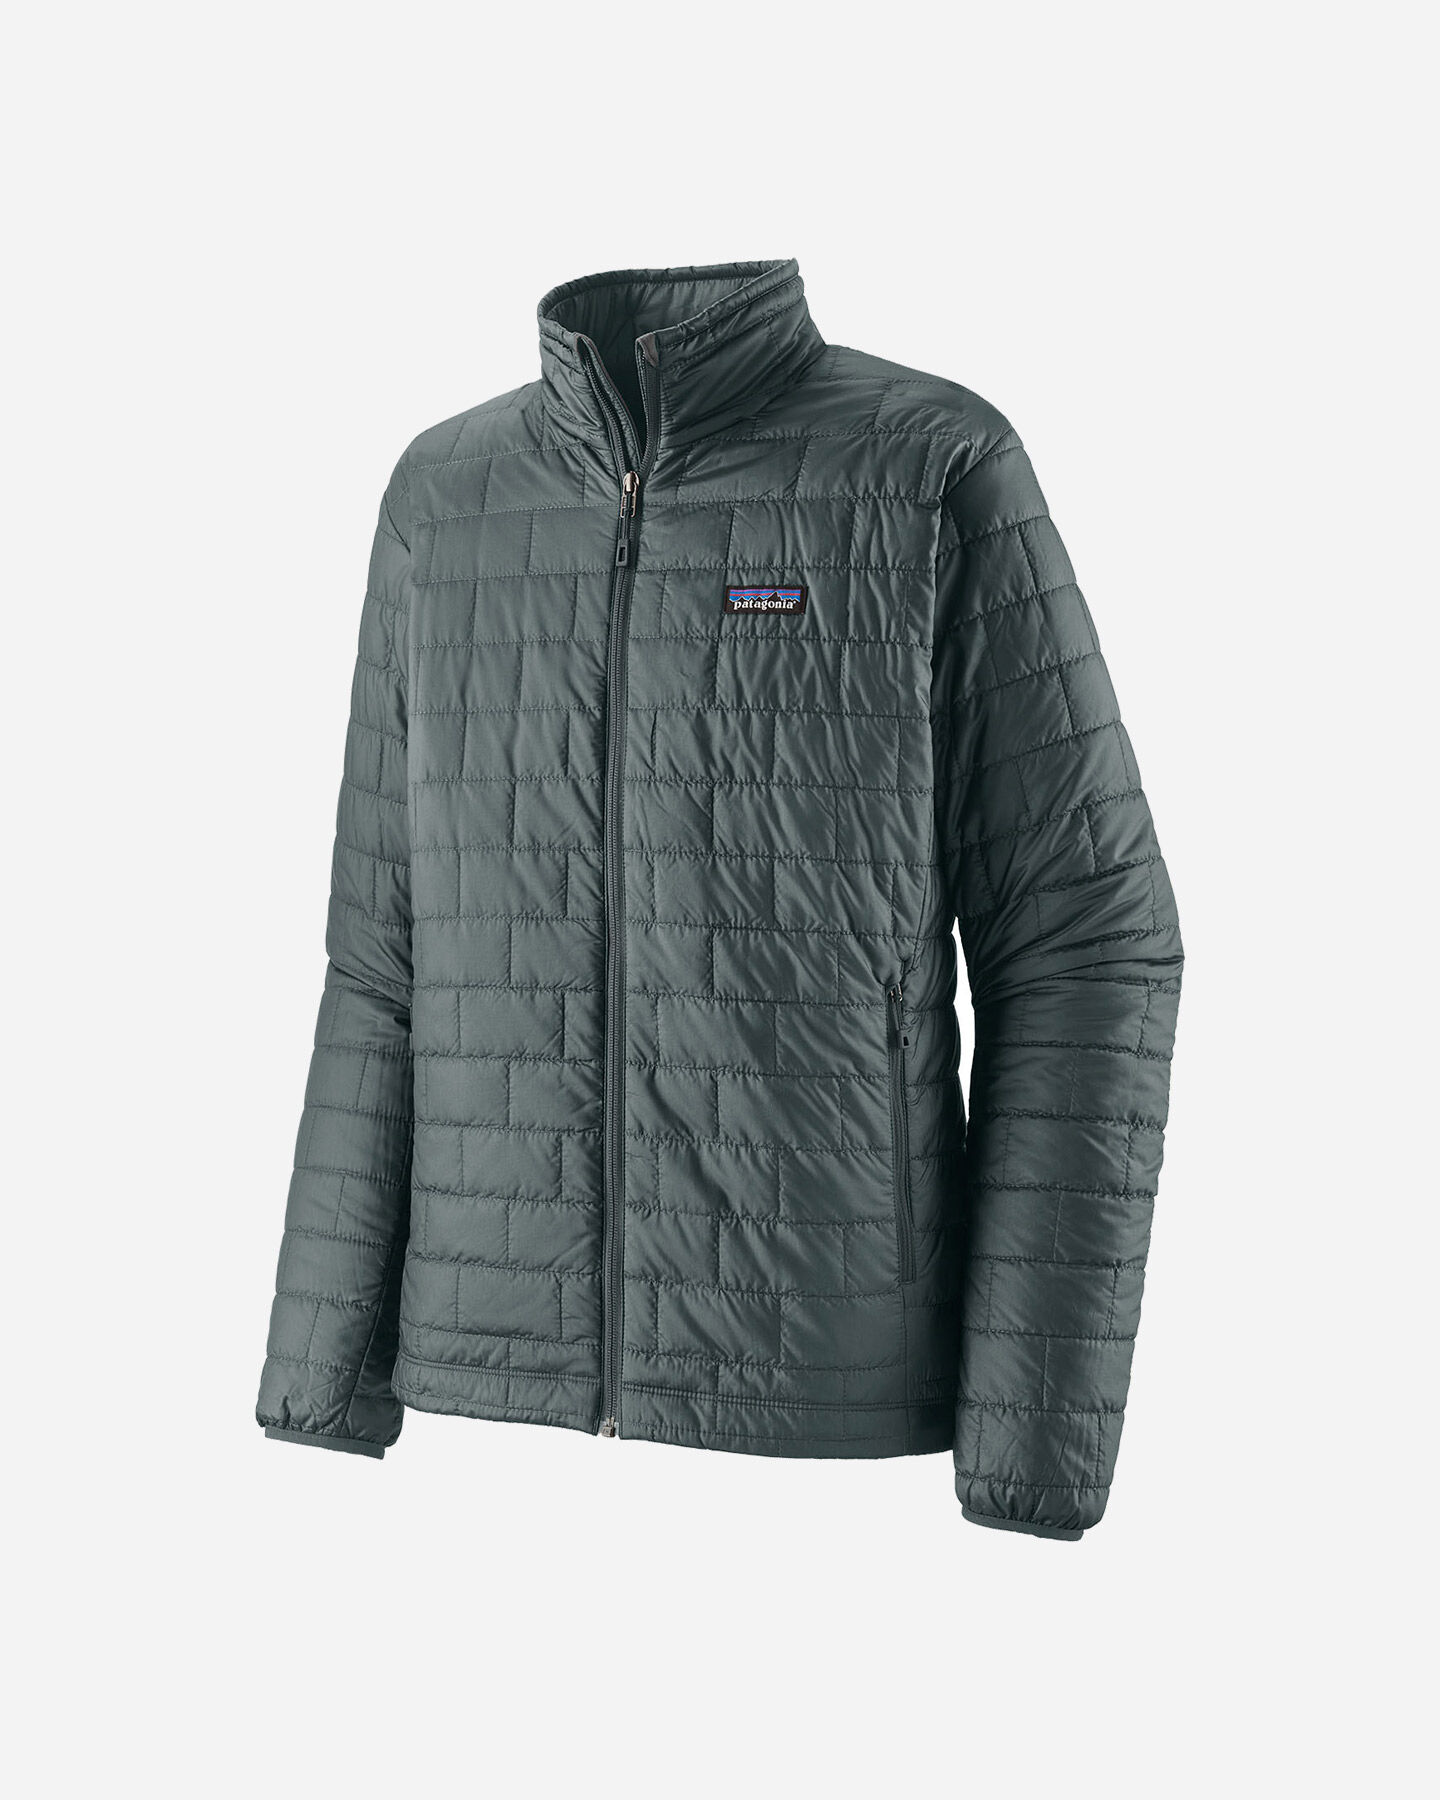  Giacca outdoor PATAGONIA NANO PUFF M S5628800|NVGN|S scatto 0